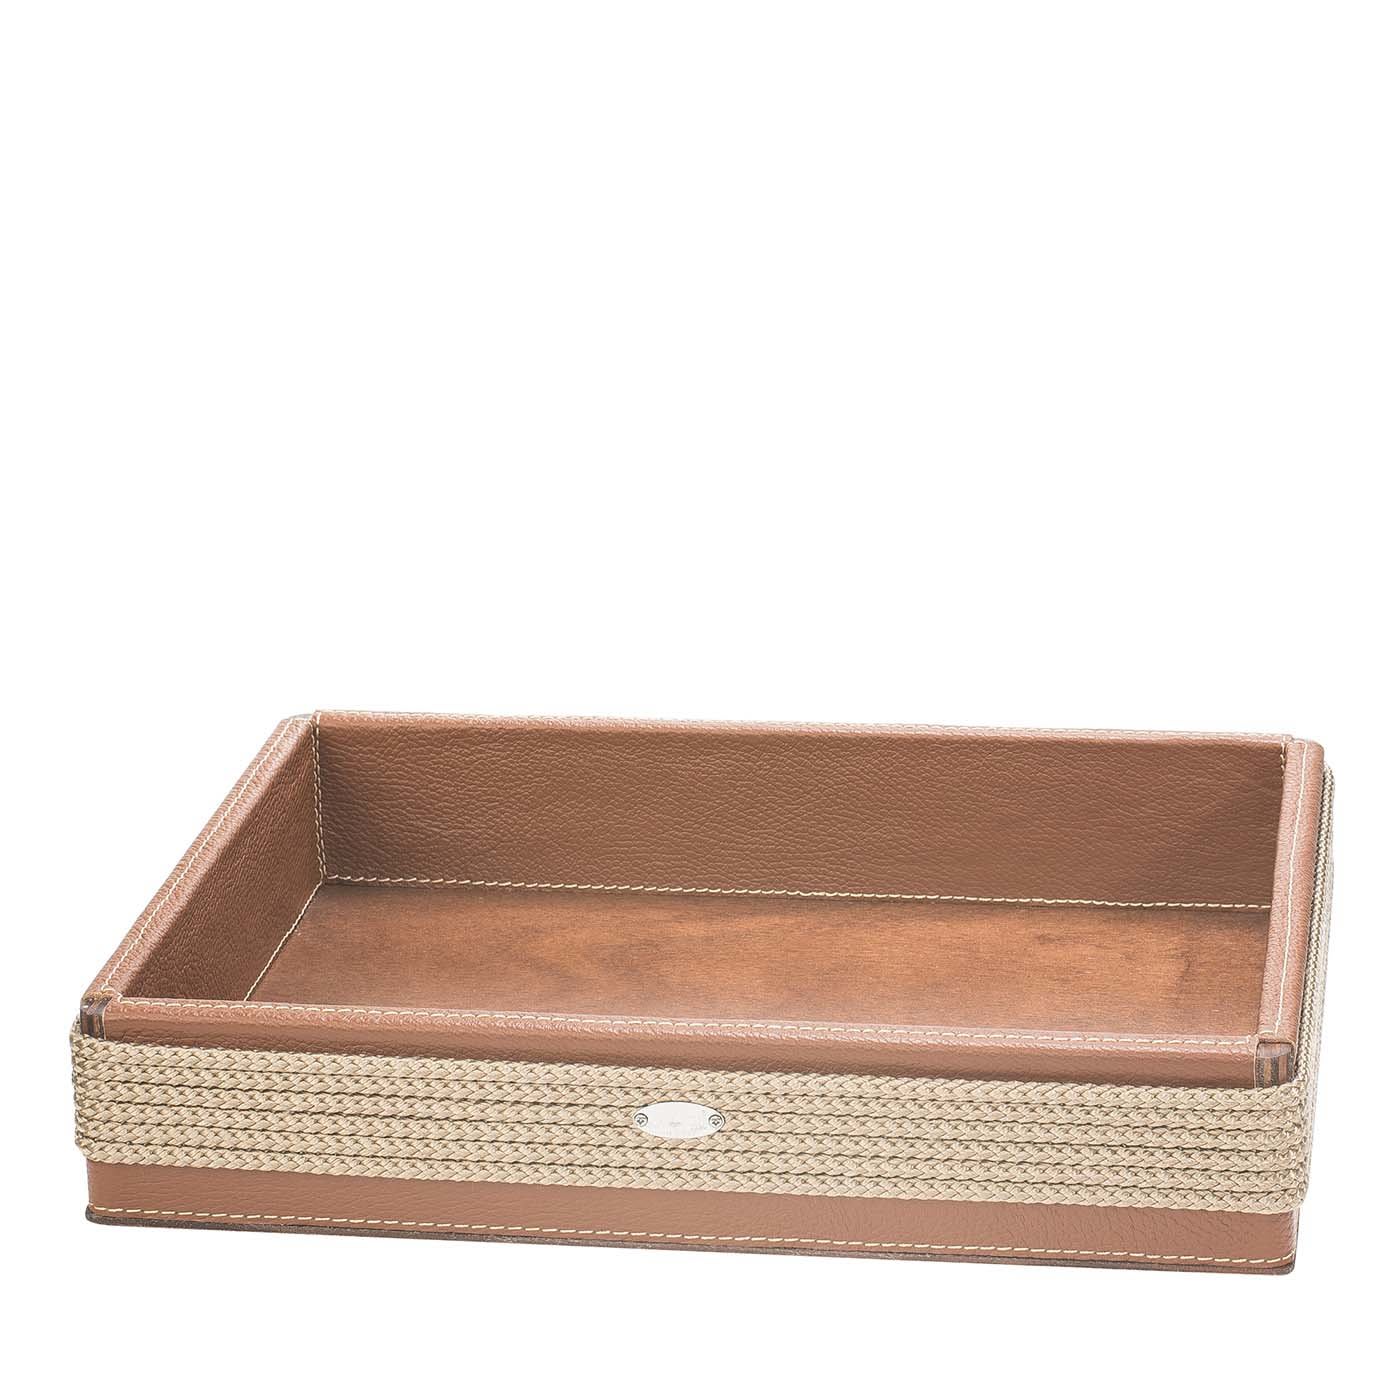 Beige Tray with Compartments - Marricreo